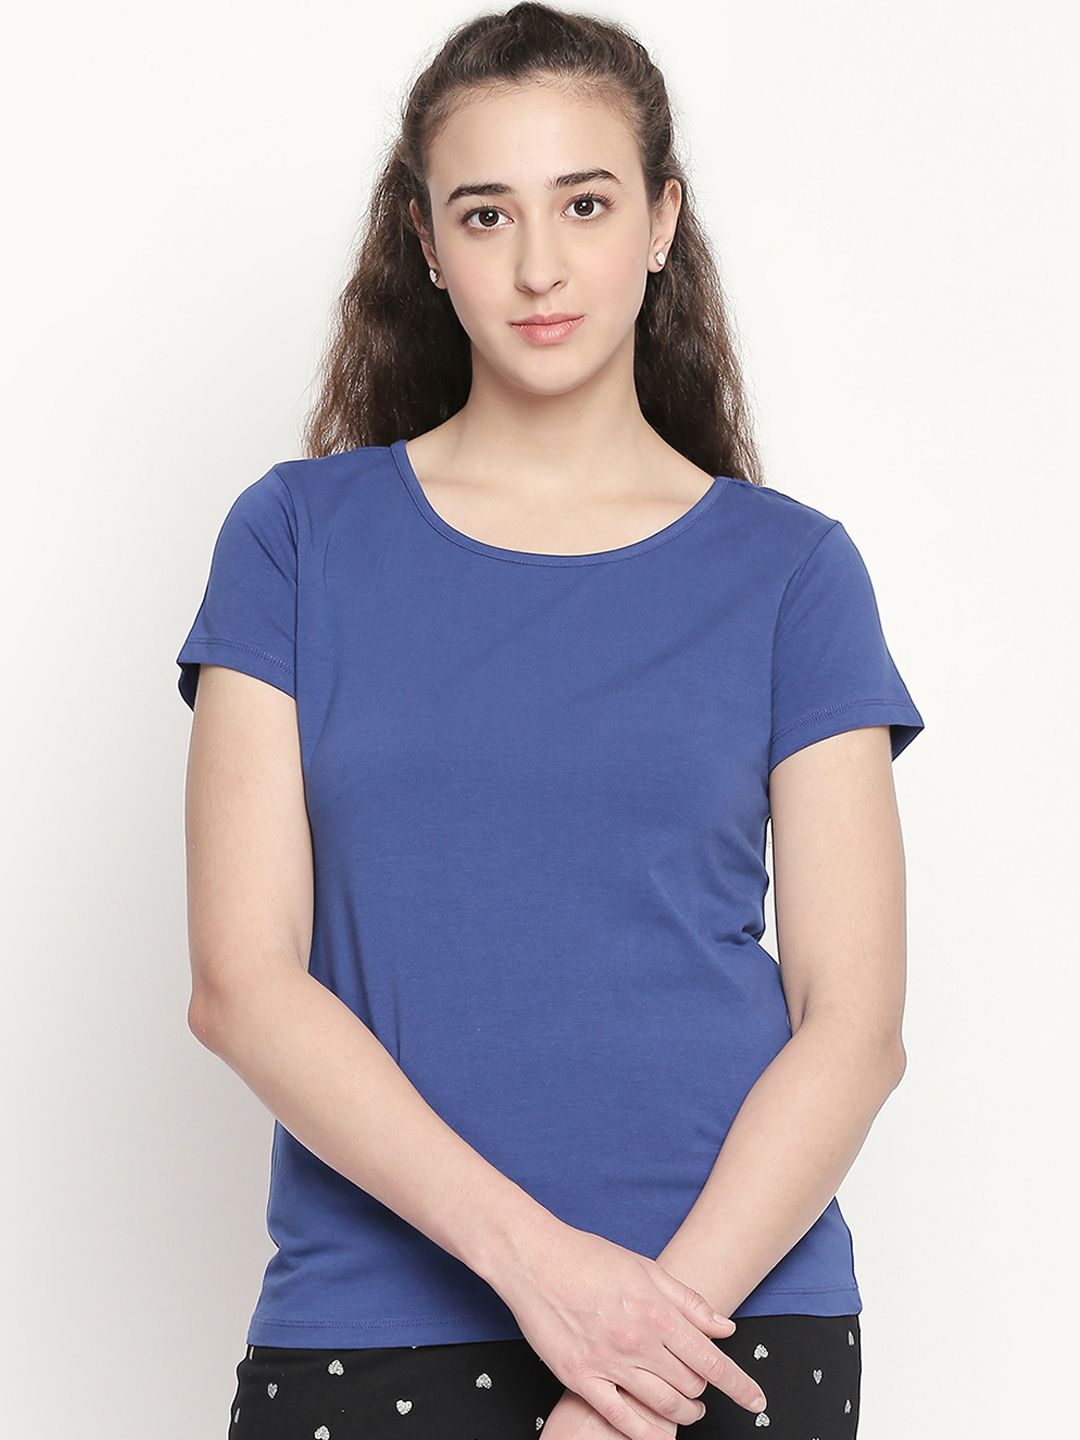 Dreamz by Pantaloons Women Blue Solid Round Neck Pure Cotton Lounge T-shirt Price in India